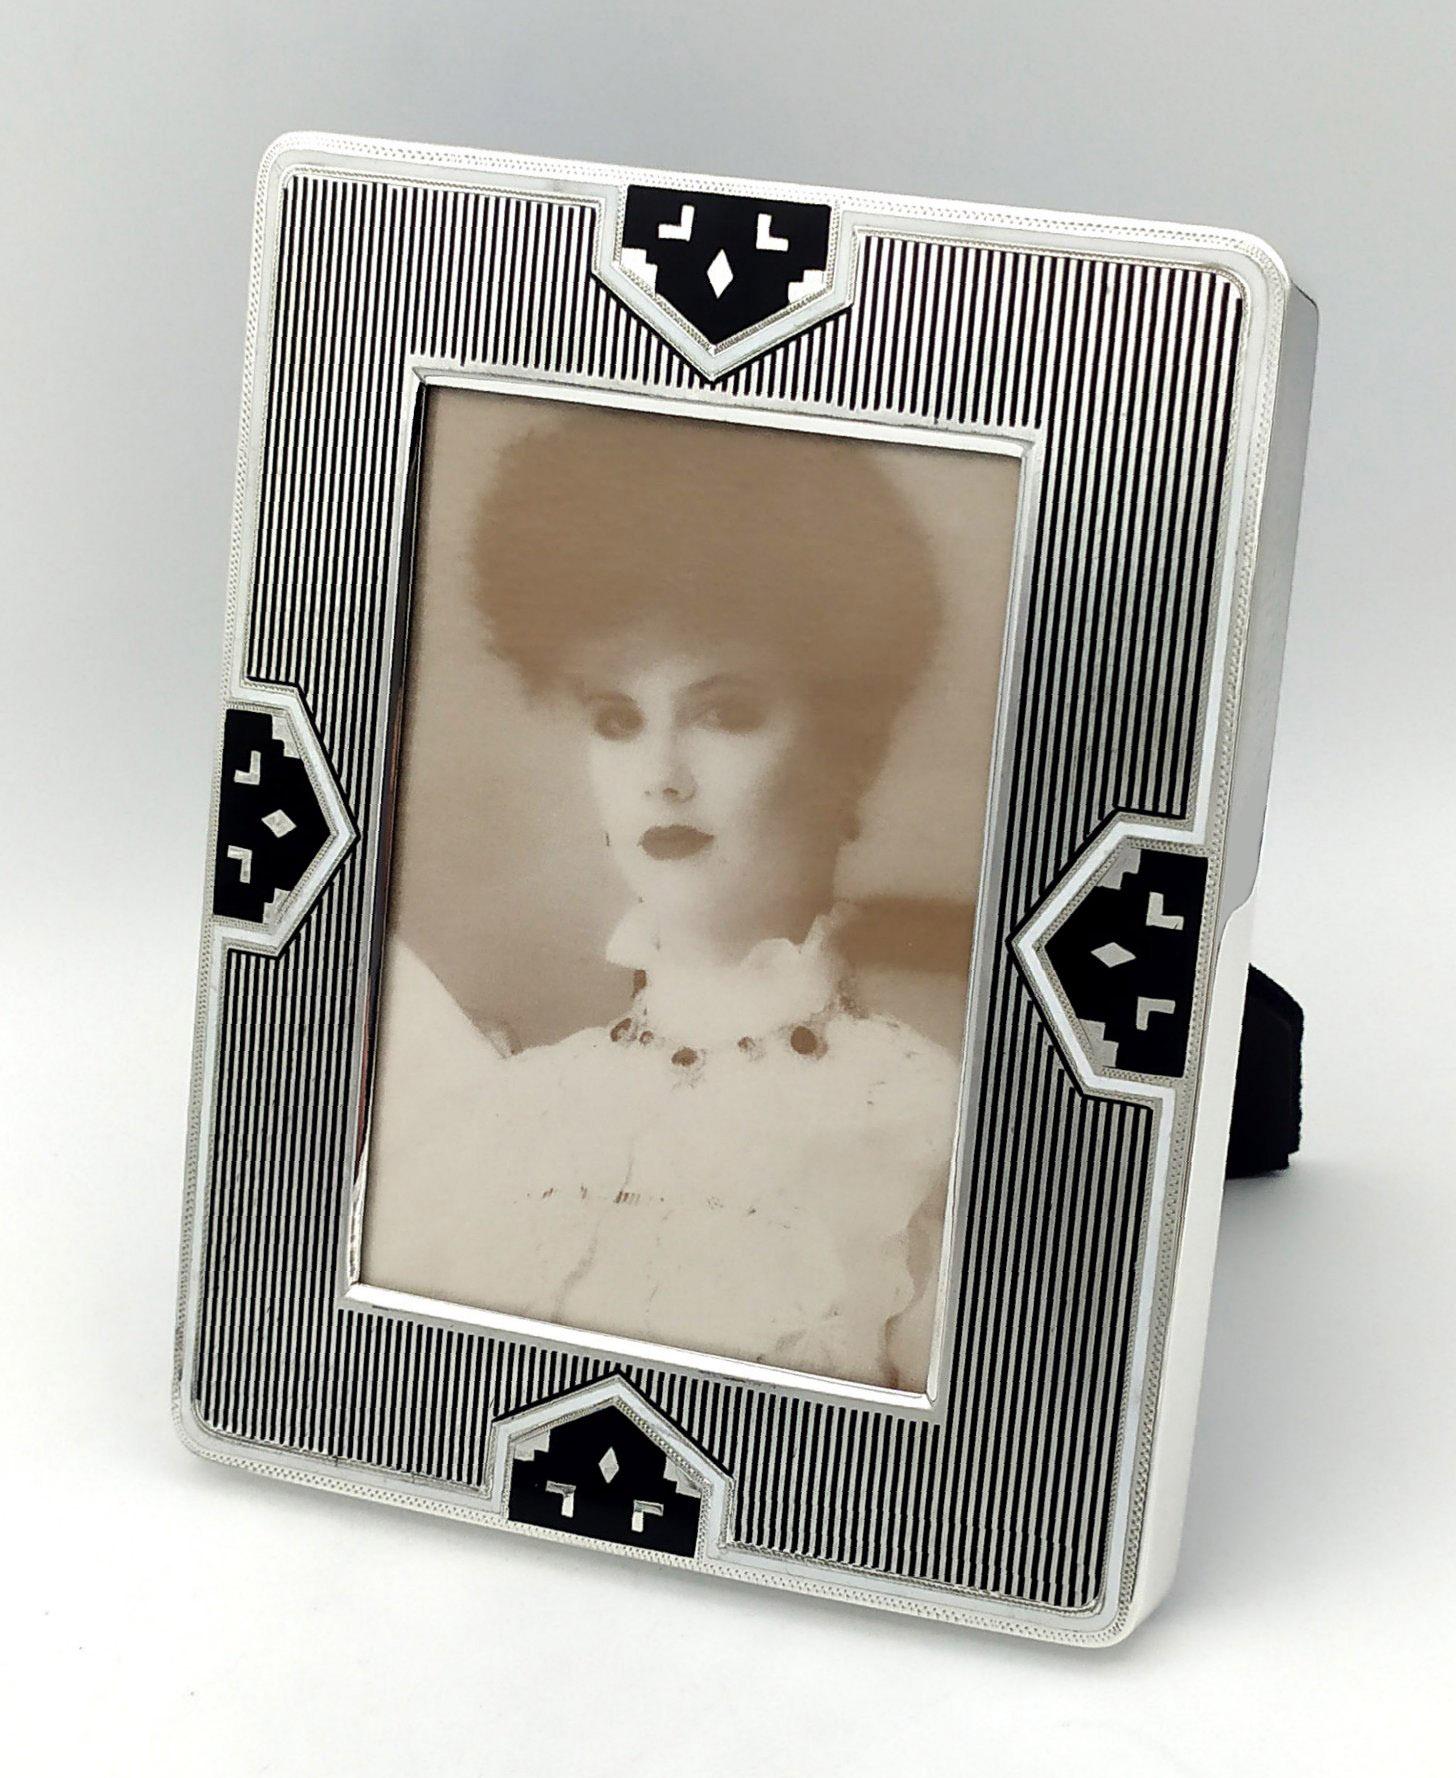 1395-5575- Rectangular photo frame with rounded corners in 925/1000 sterling silver with fire-enamelled Art Deco design. Internal dimensions cm. 8.5 x 12.5 external cm. 13.5 x 17.5. Weight gr. 244. Designed by Giorgio Salimbeni in 1976 inspired by